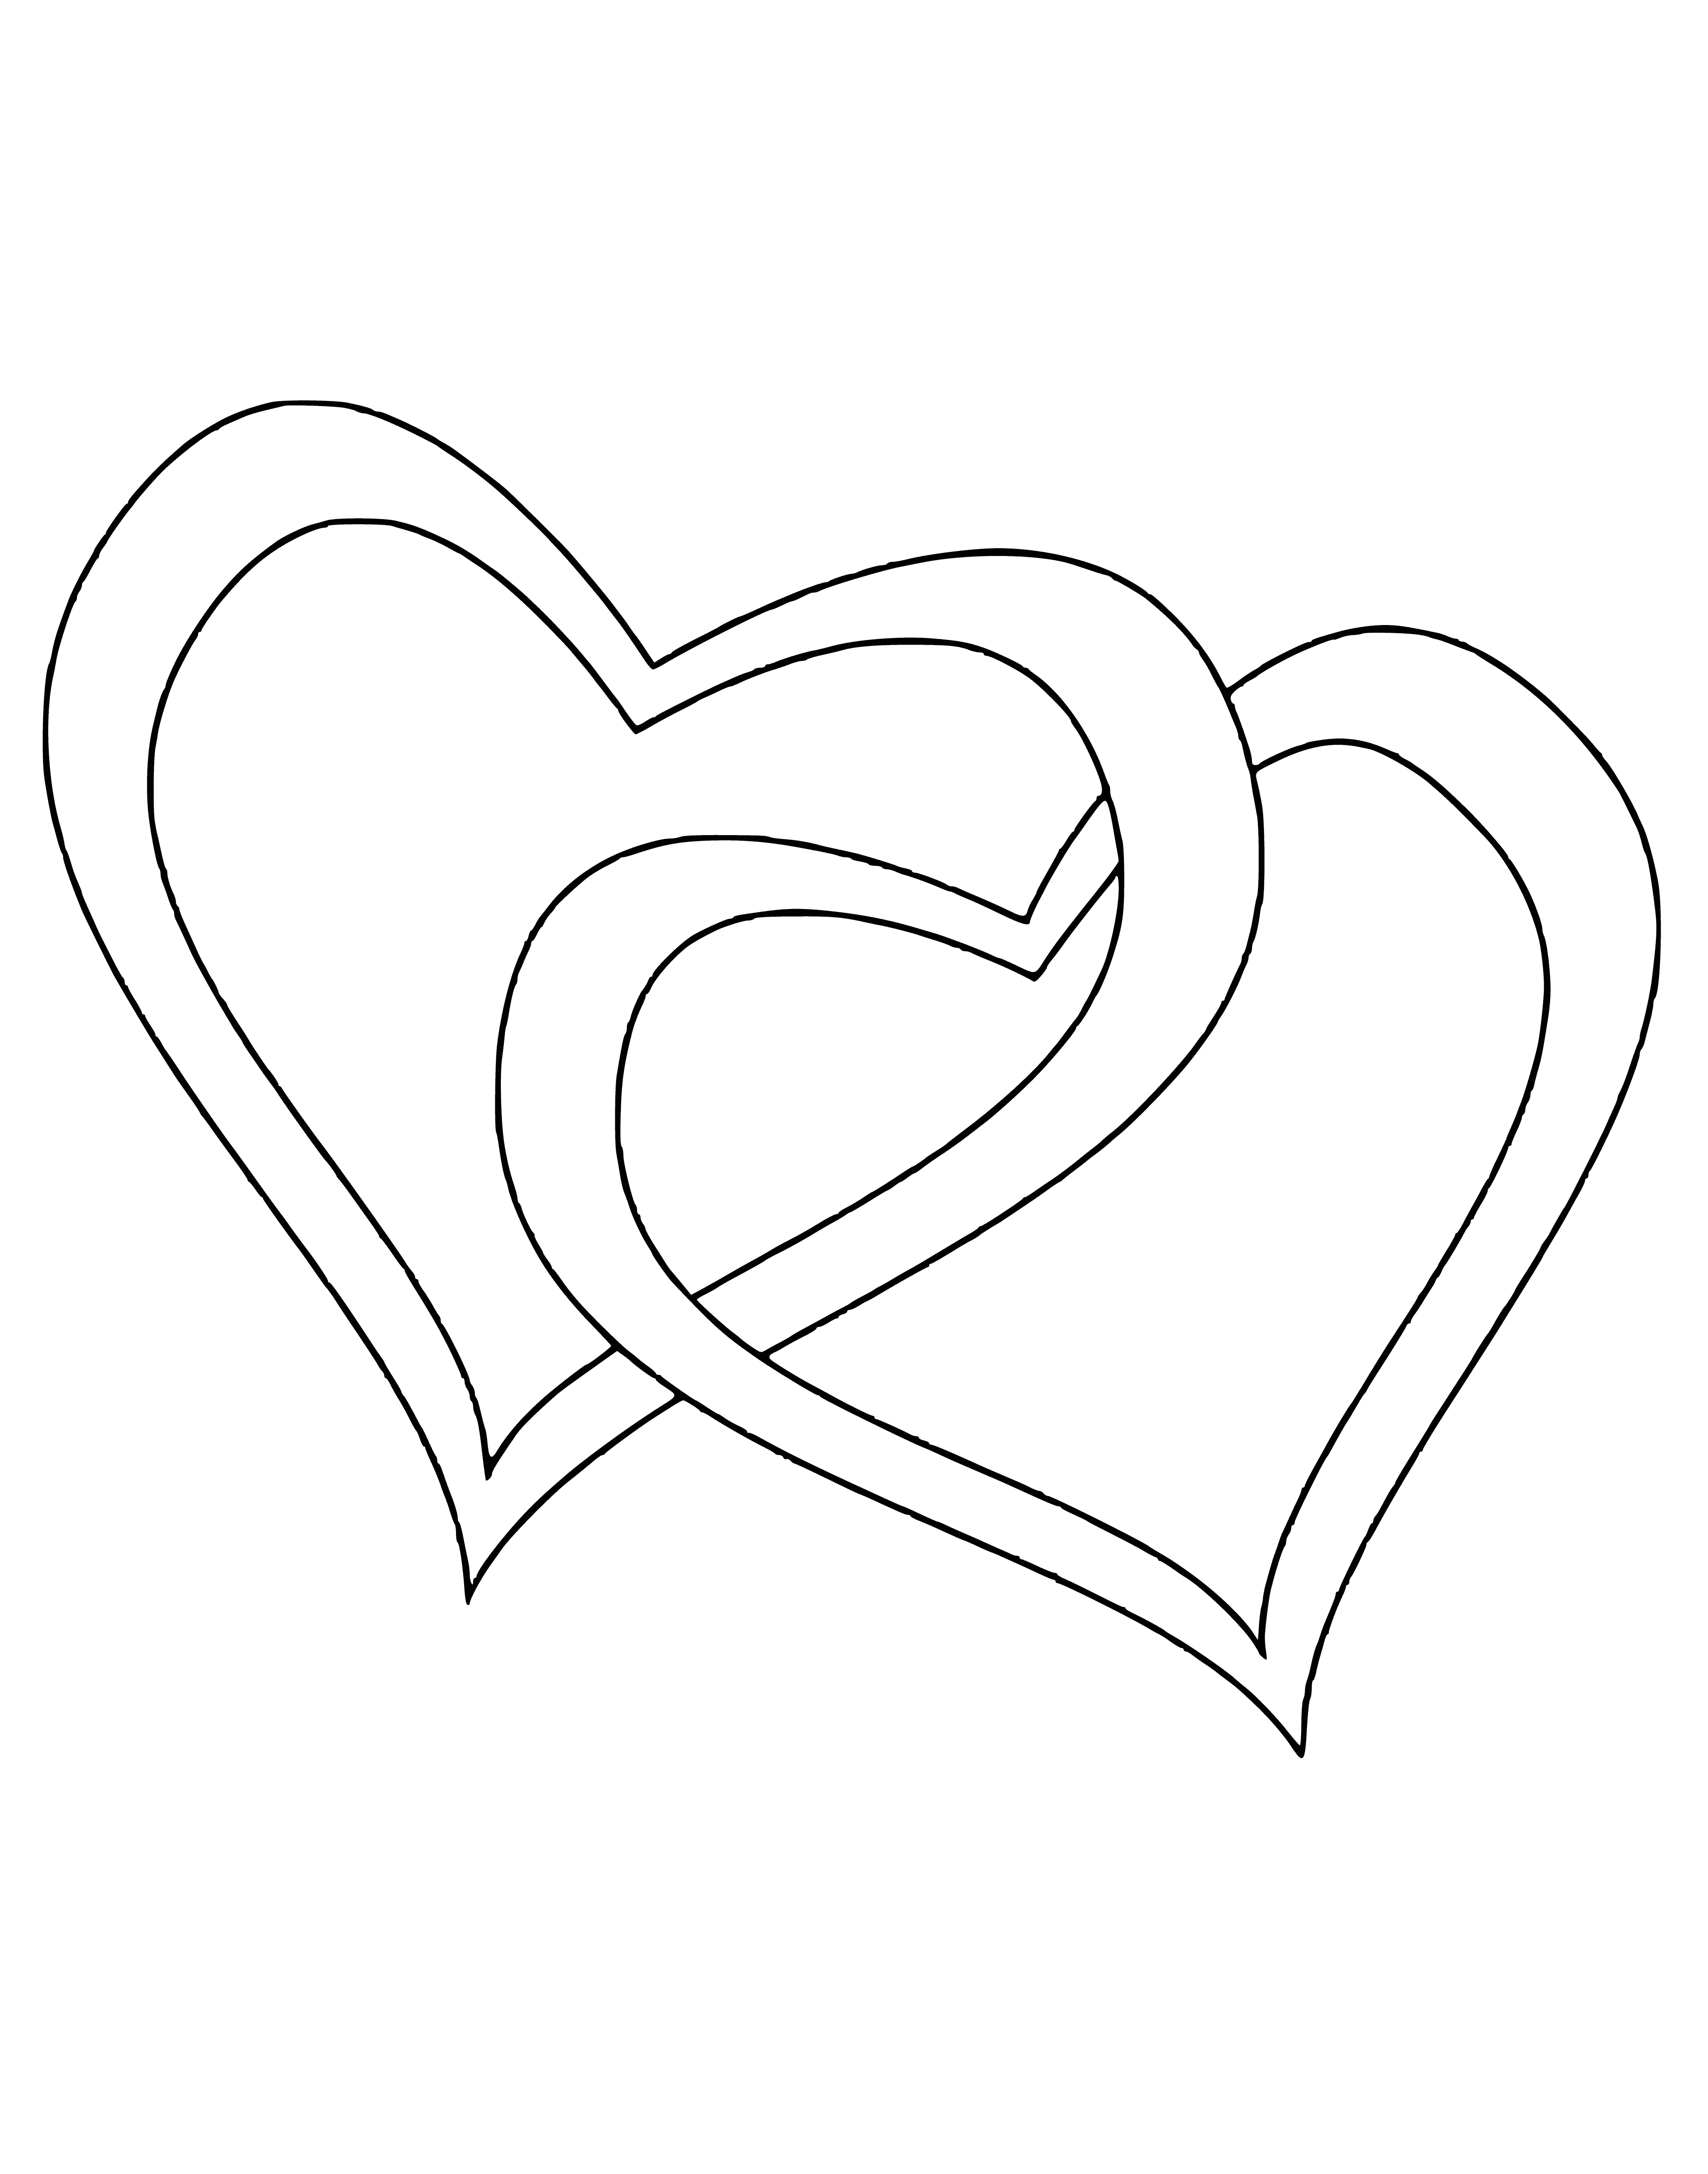 coloring page: A large heart in the center of the page with colorful, smaller hearts around it - "Happy Valentine's Day" - celebrates the special holiday.